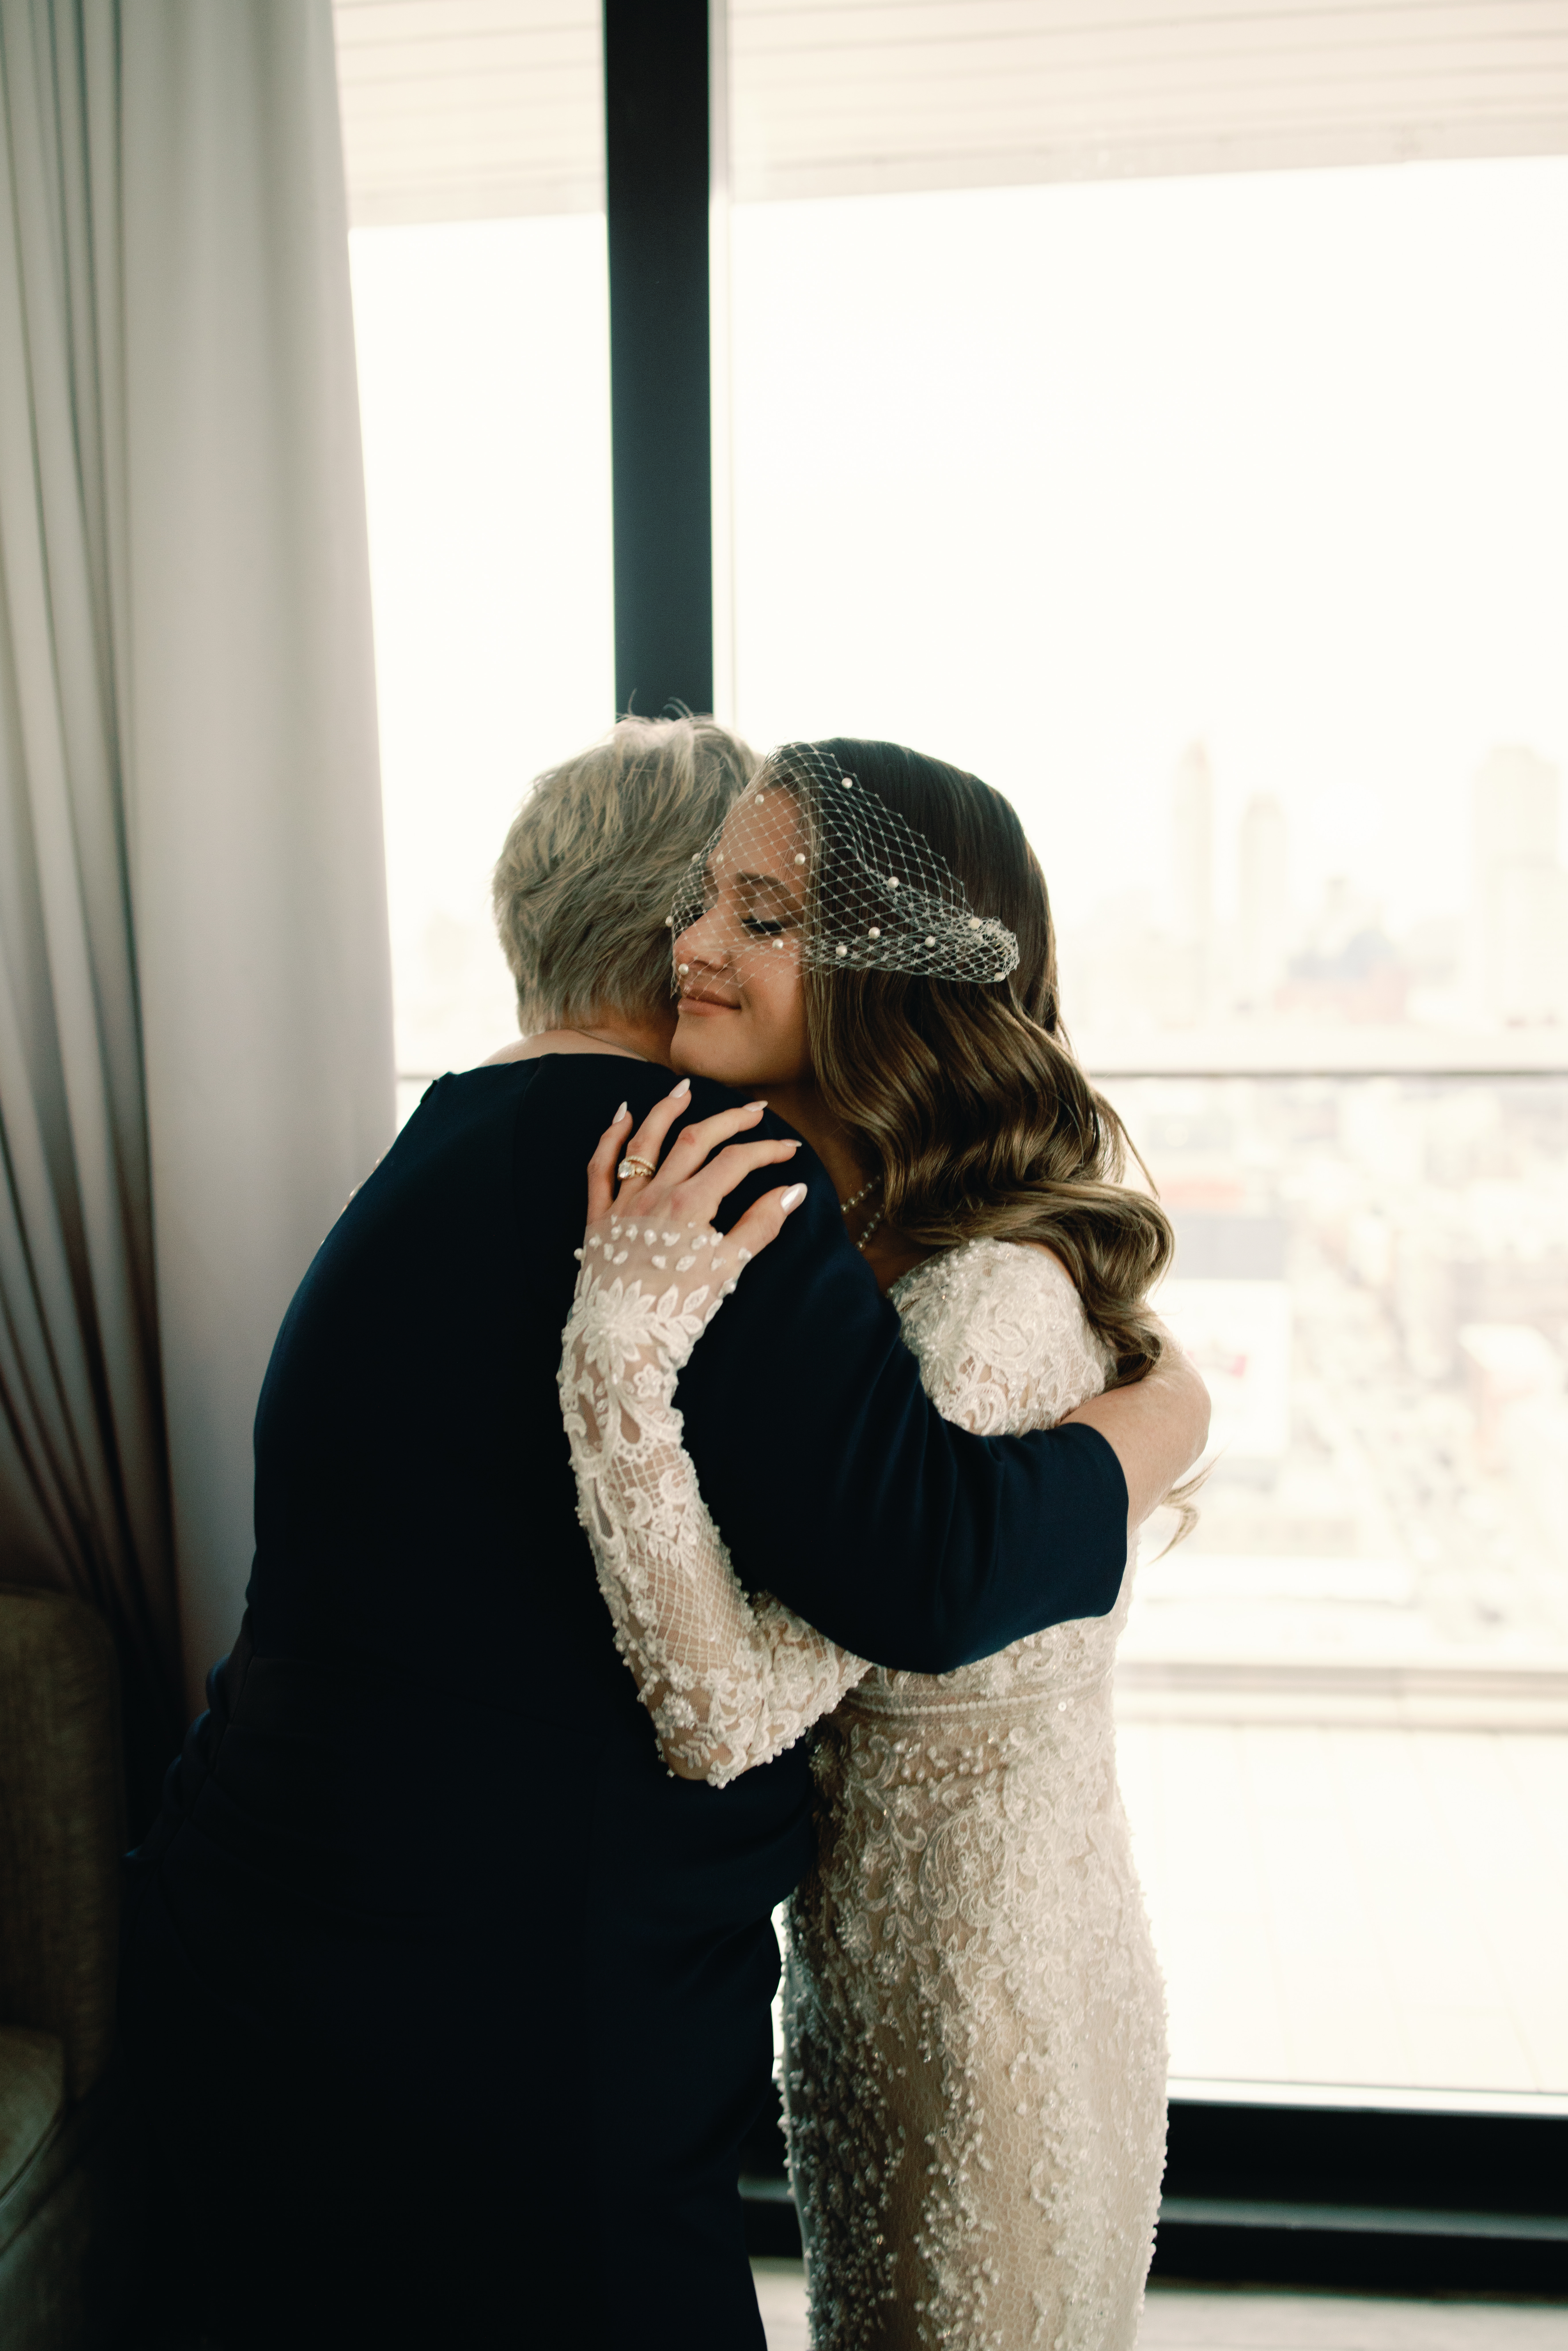 A Romantic Winter Wonderland Wedding in New York City by Abby Leigh Photography